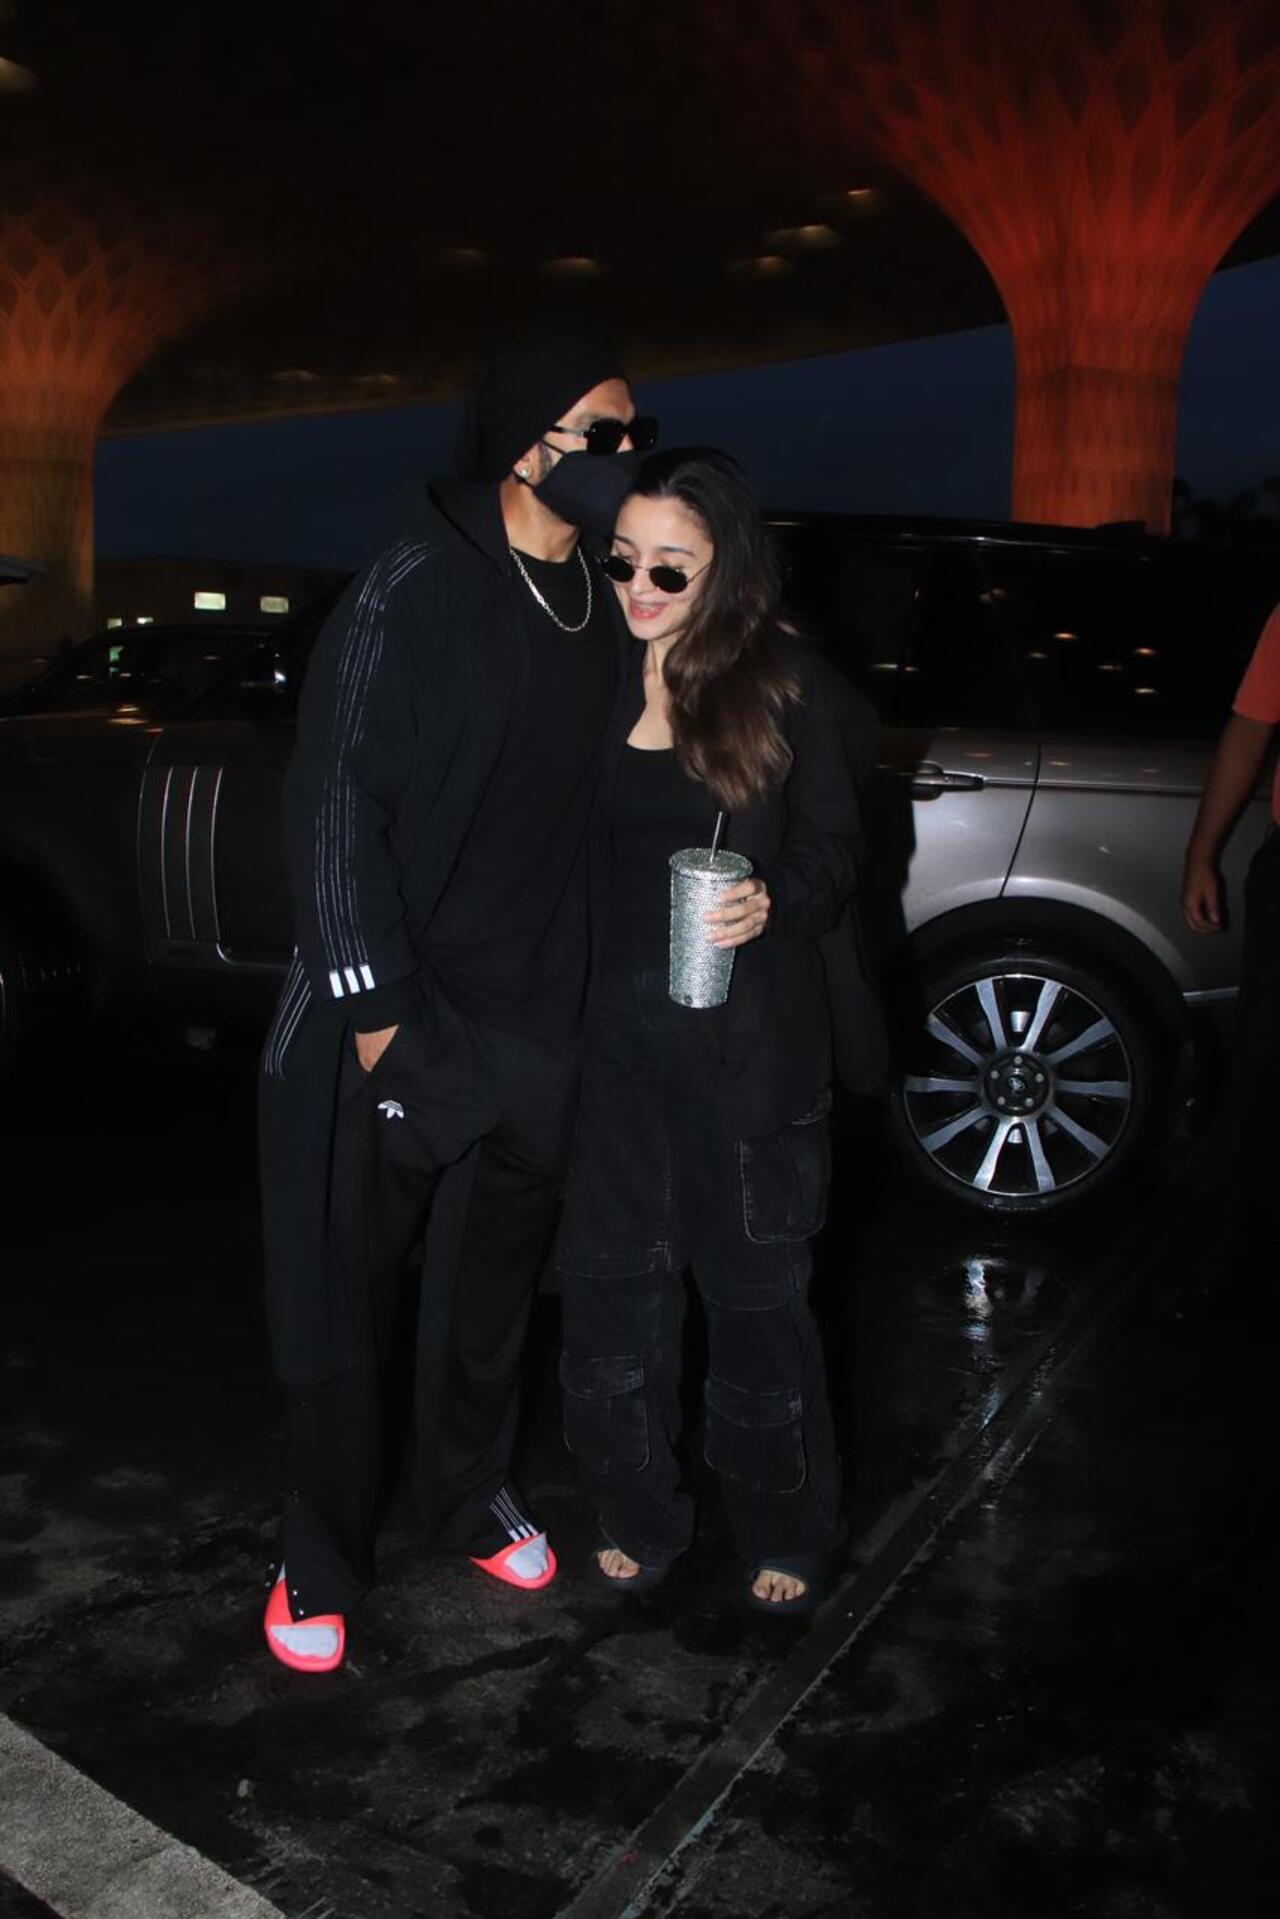 Alia looked chic in a black cargo pants, black camisole and a shirt over it. She was seen holding a beverage cup in her hand. Ranveer, on the other hand, opted for a more athleisure look